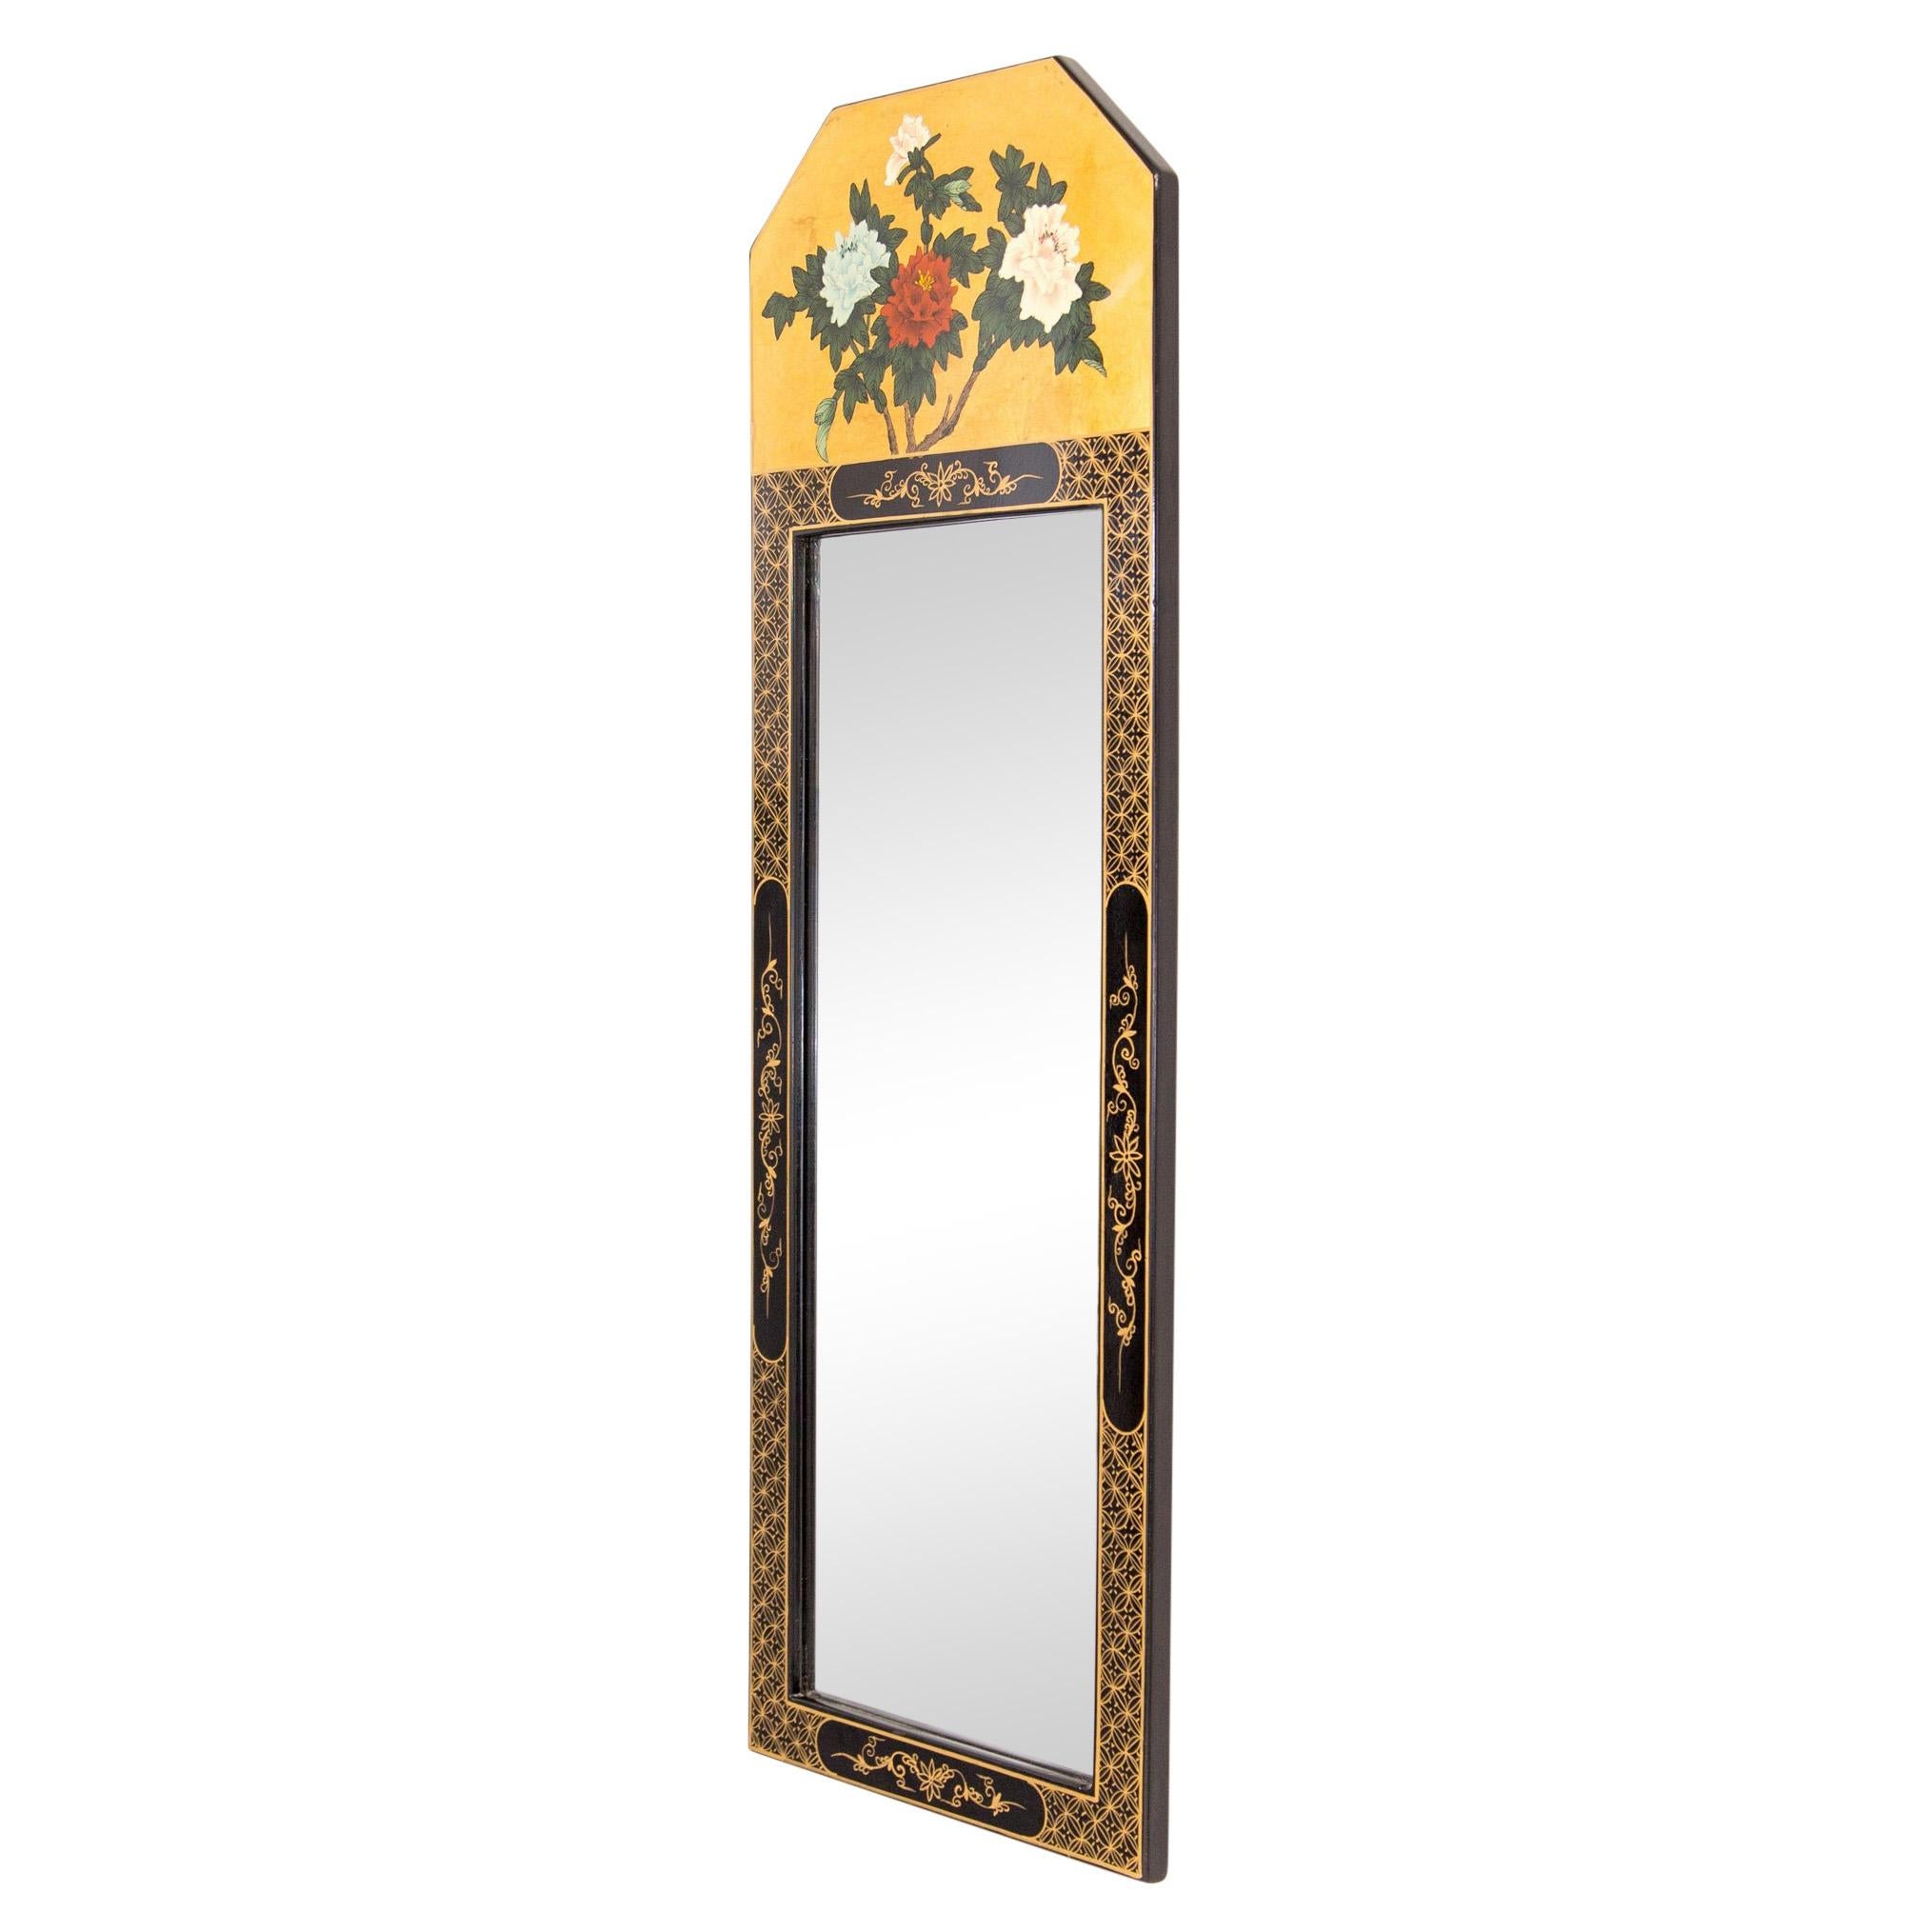 Vintage Chinoiserie black and gold lacquered trumeau wall mirror, circa 1980s. The gilded 8.5